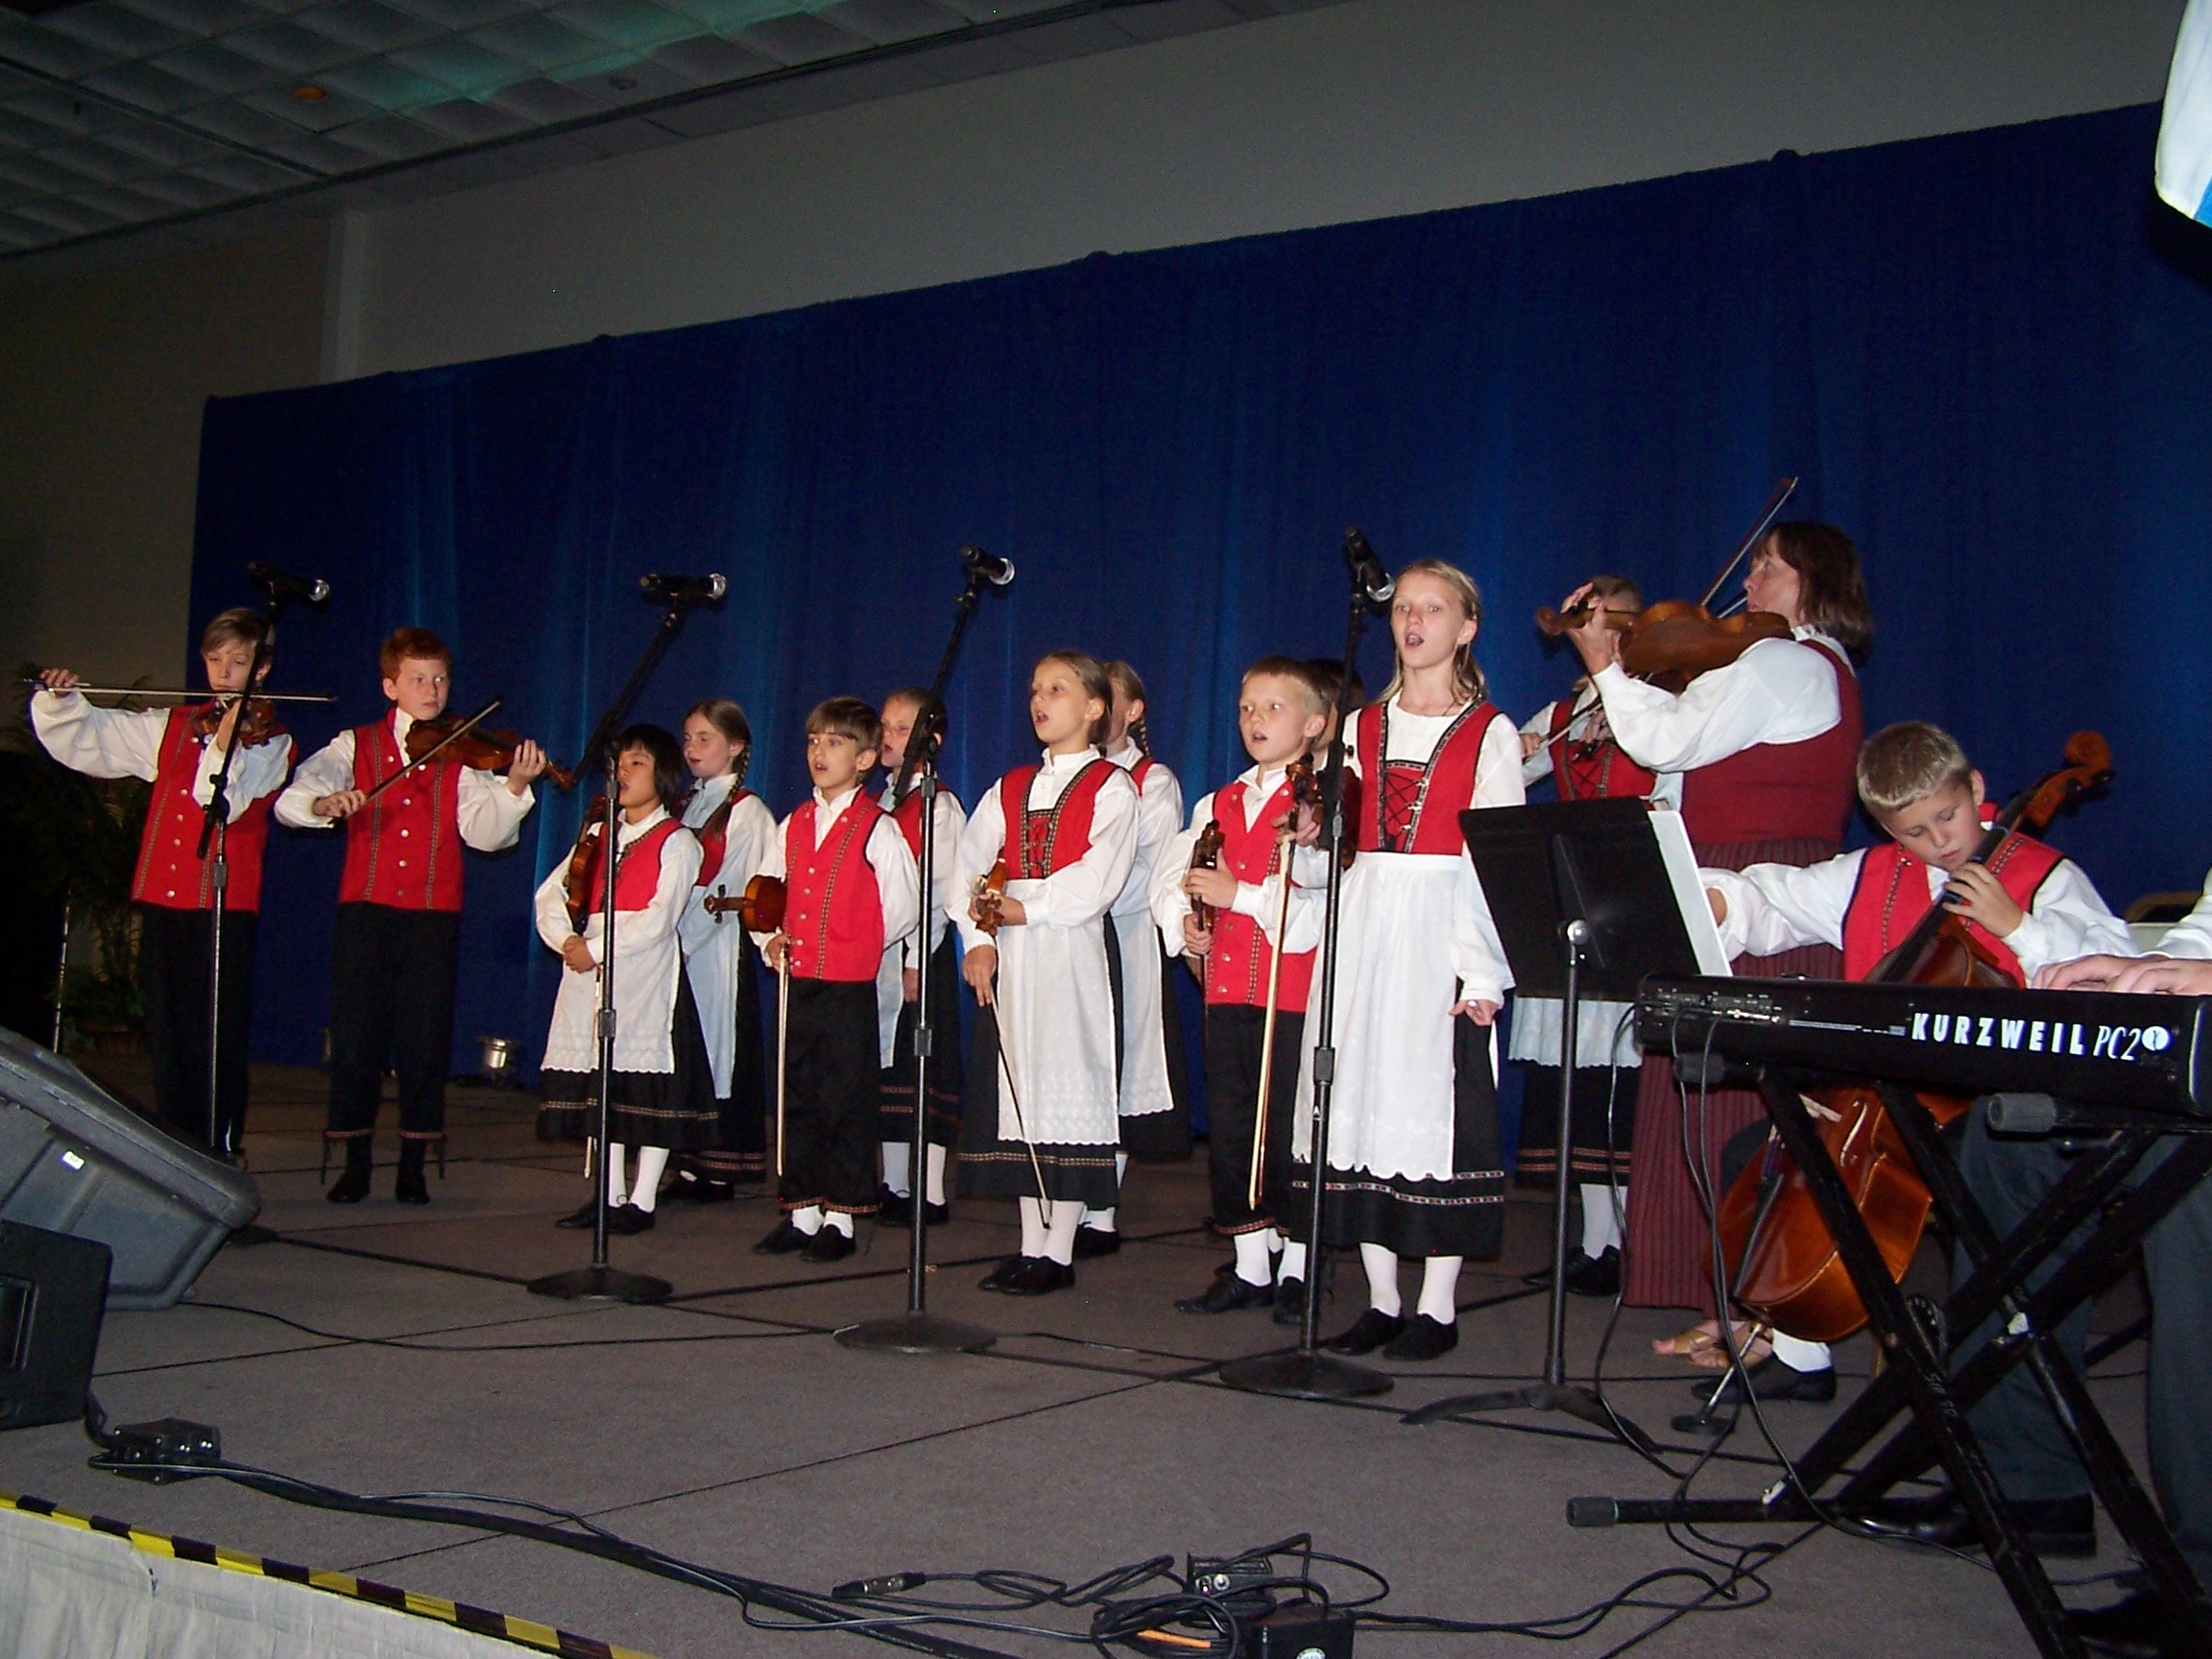 A great example of Finnish culture being passed on to the next generation is the ”Singing Strings”-youth orchestra who performed at FinnFest 2011 in San Diego.